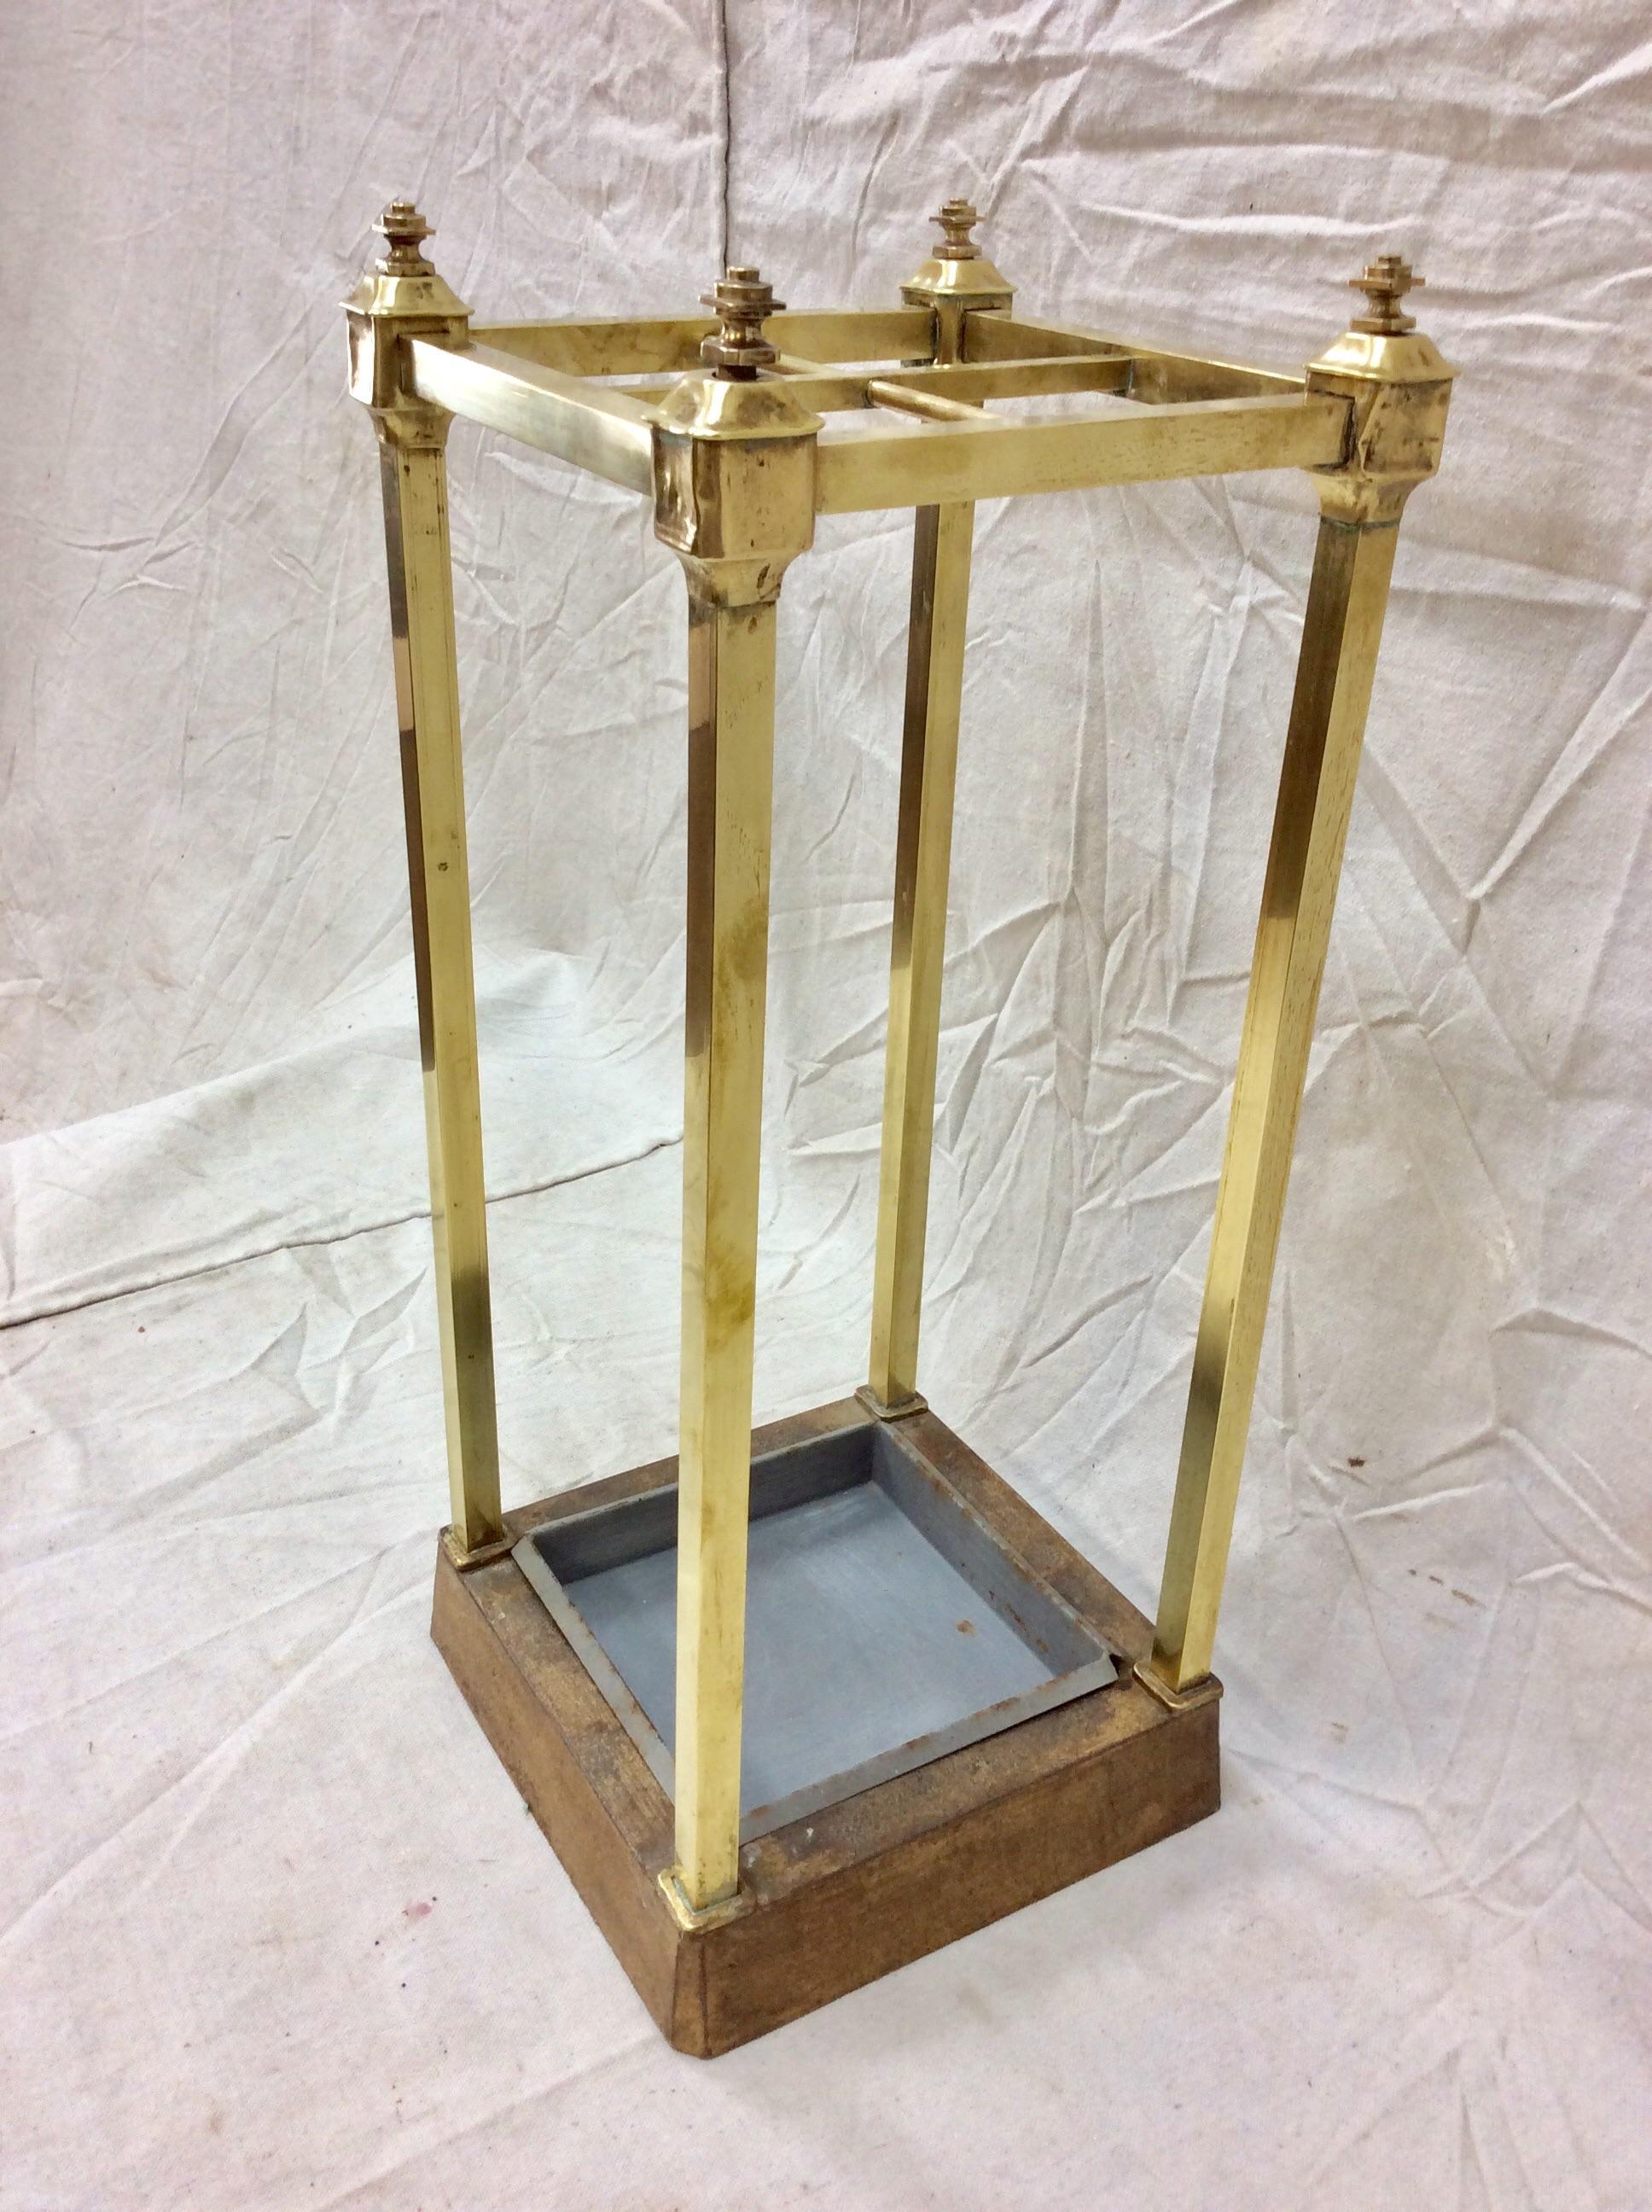 Early 20th Century French Brass Umbrella Stand In Good Condition For Sale In Burton, TX